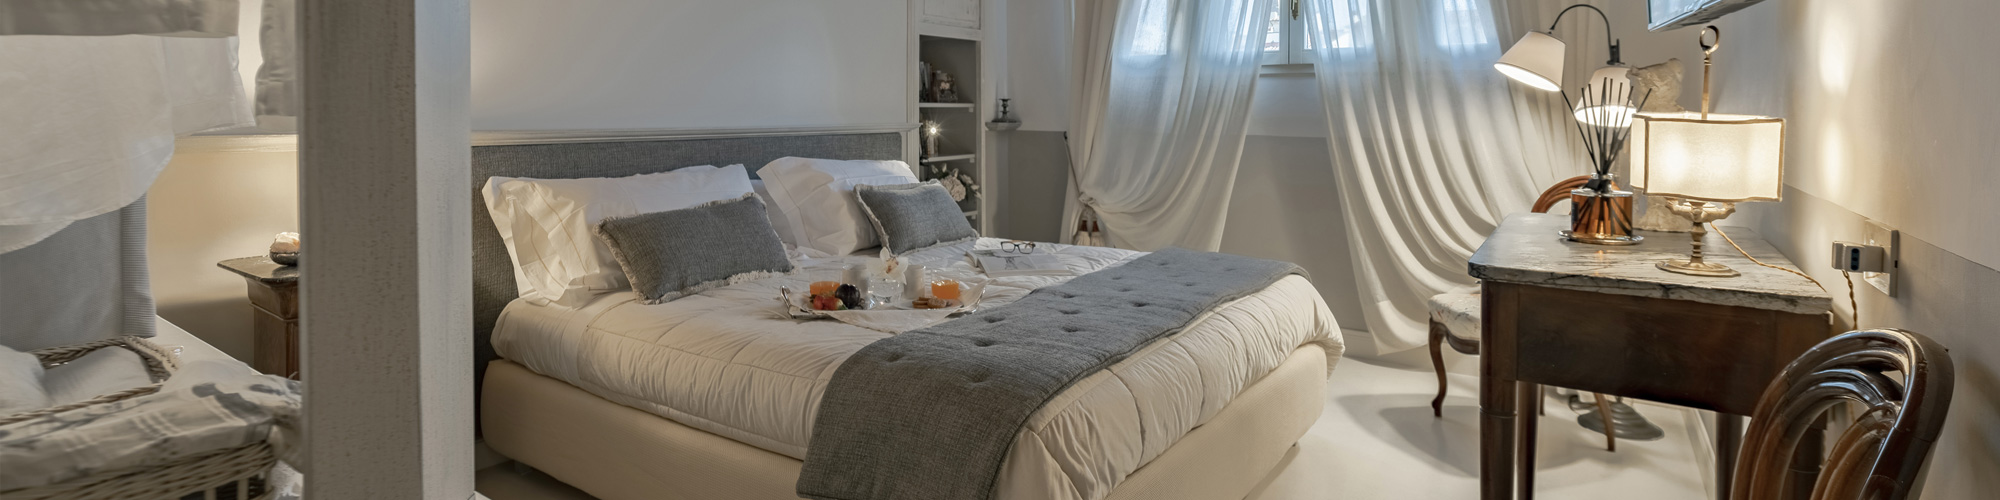 Refined bedroom of the Altana Visconti apartment